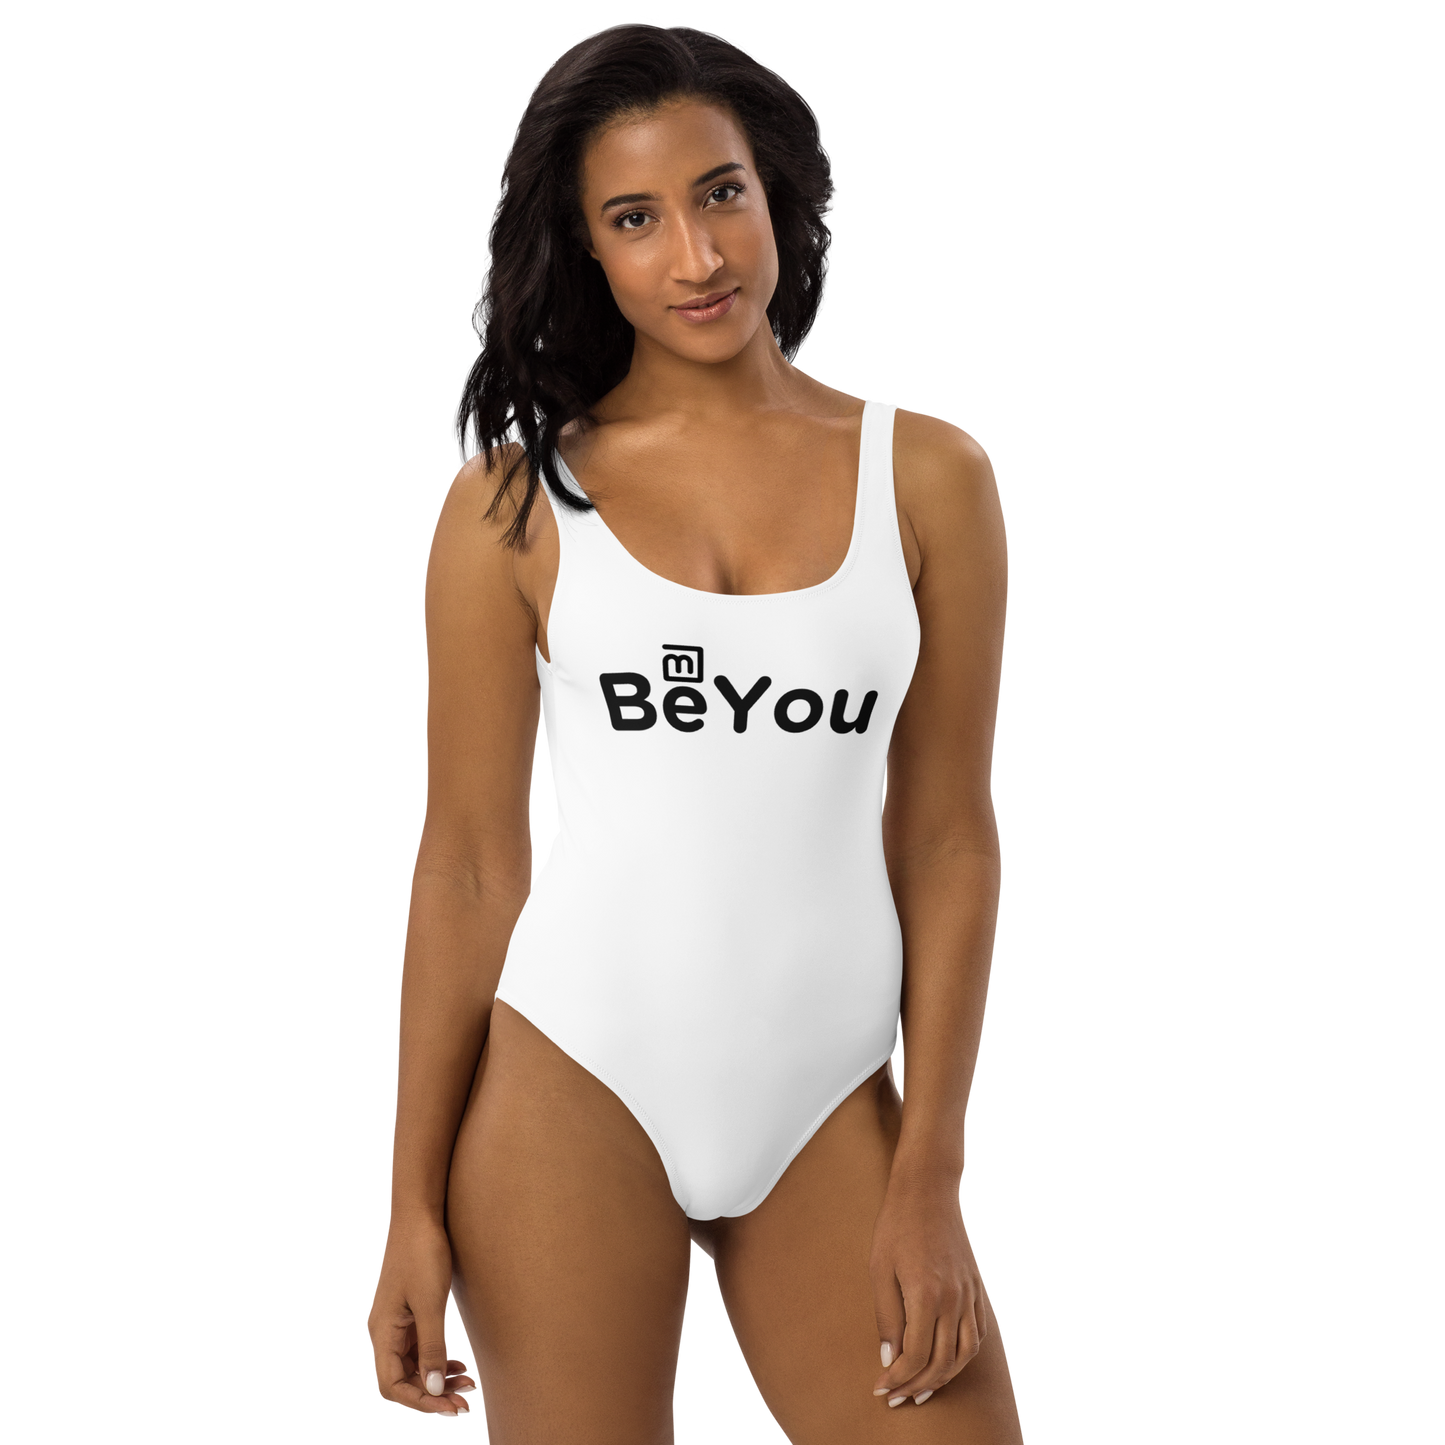 White One-Piece Body Shaper BeYou Performance Swimsuit